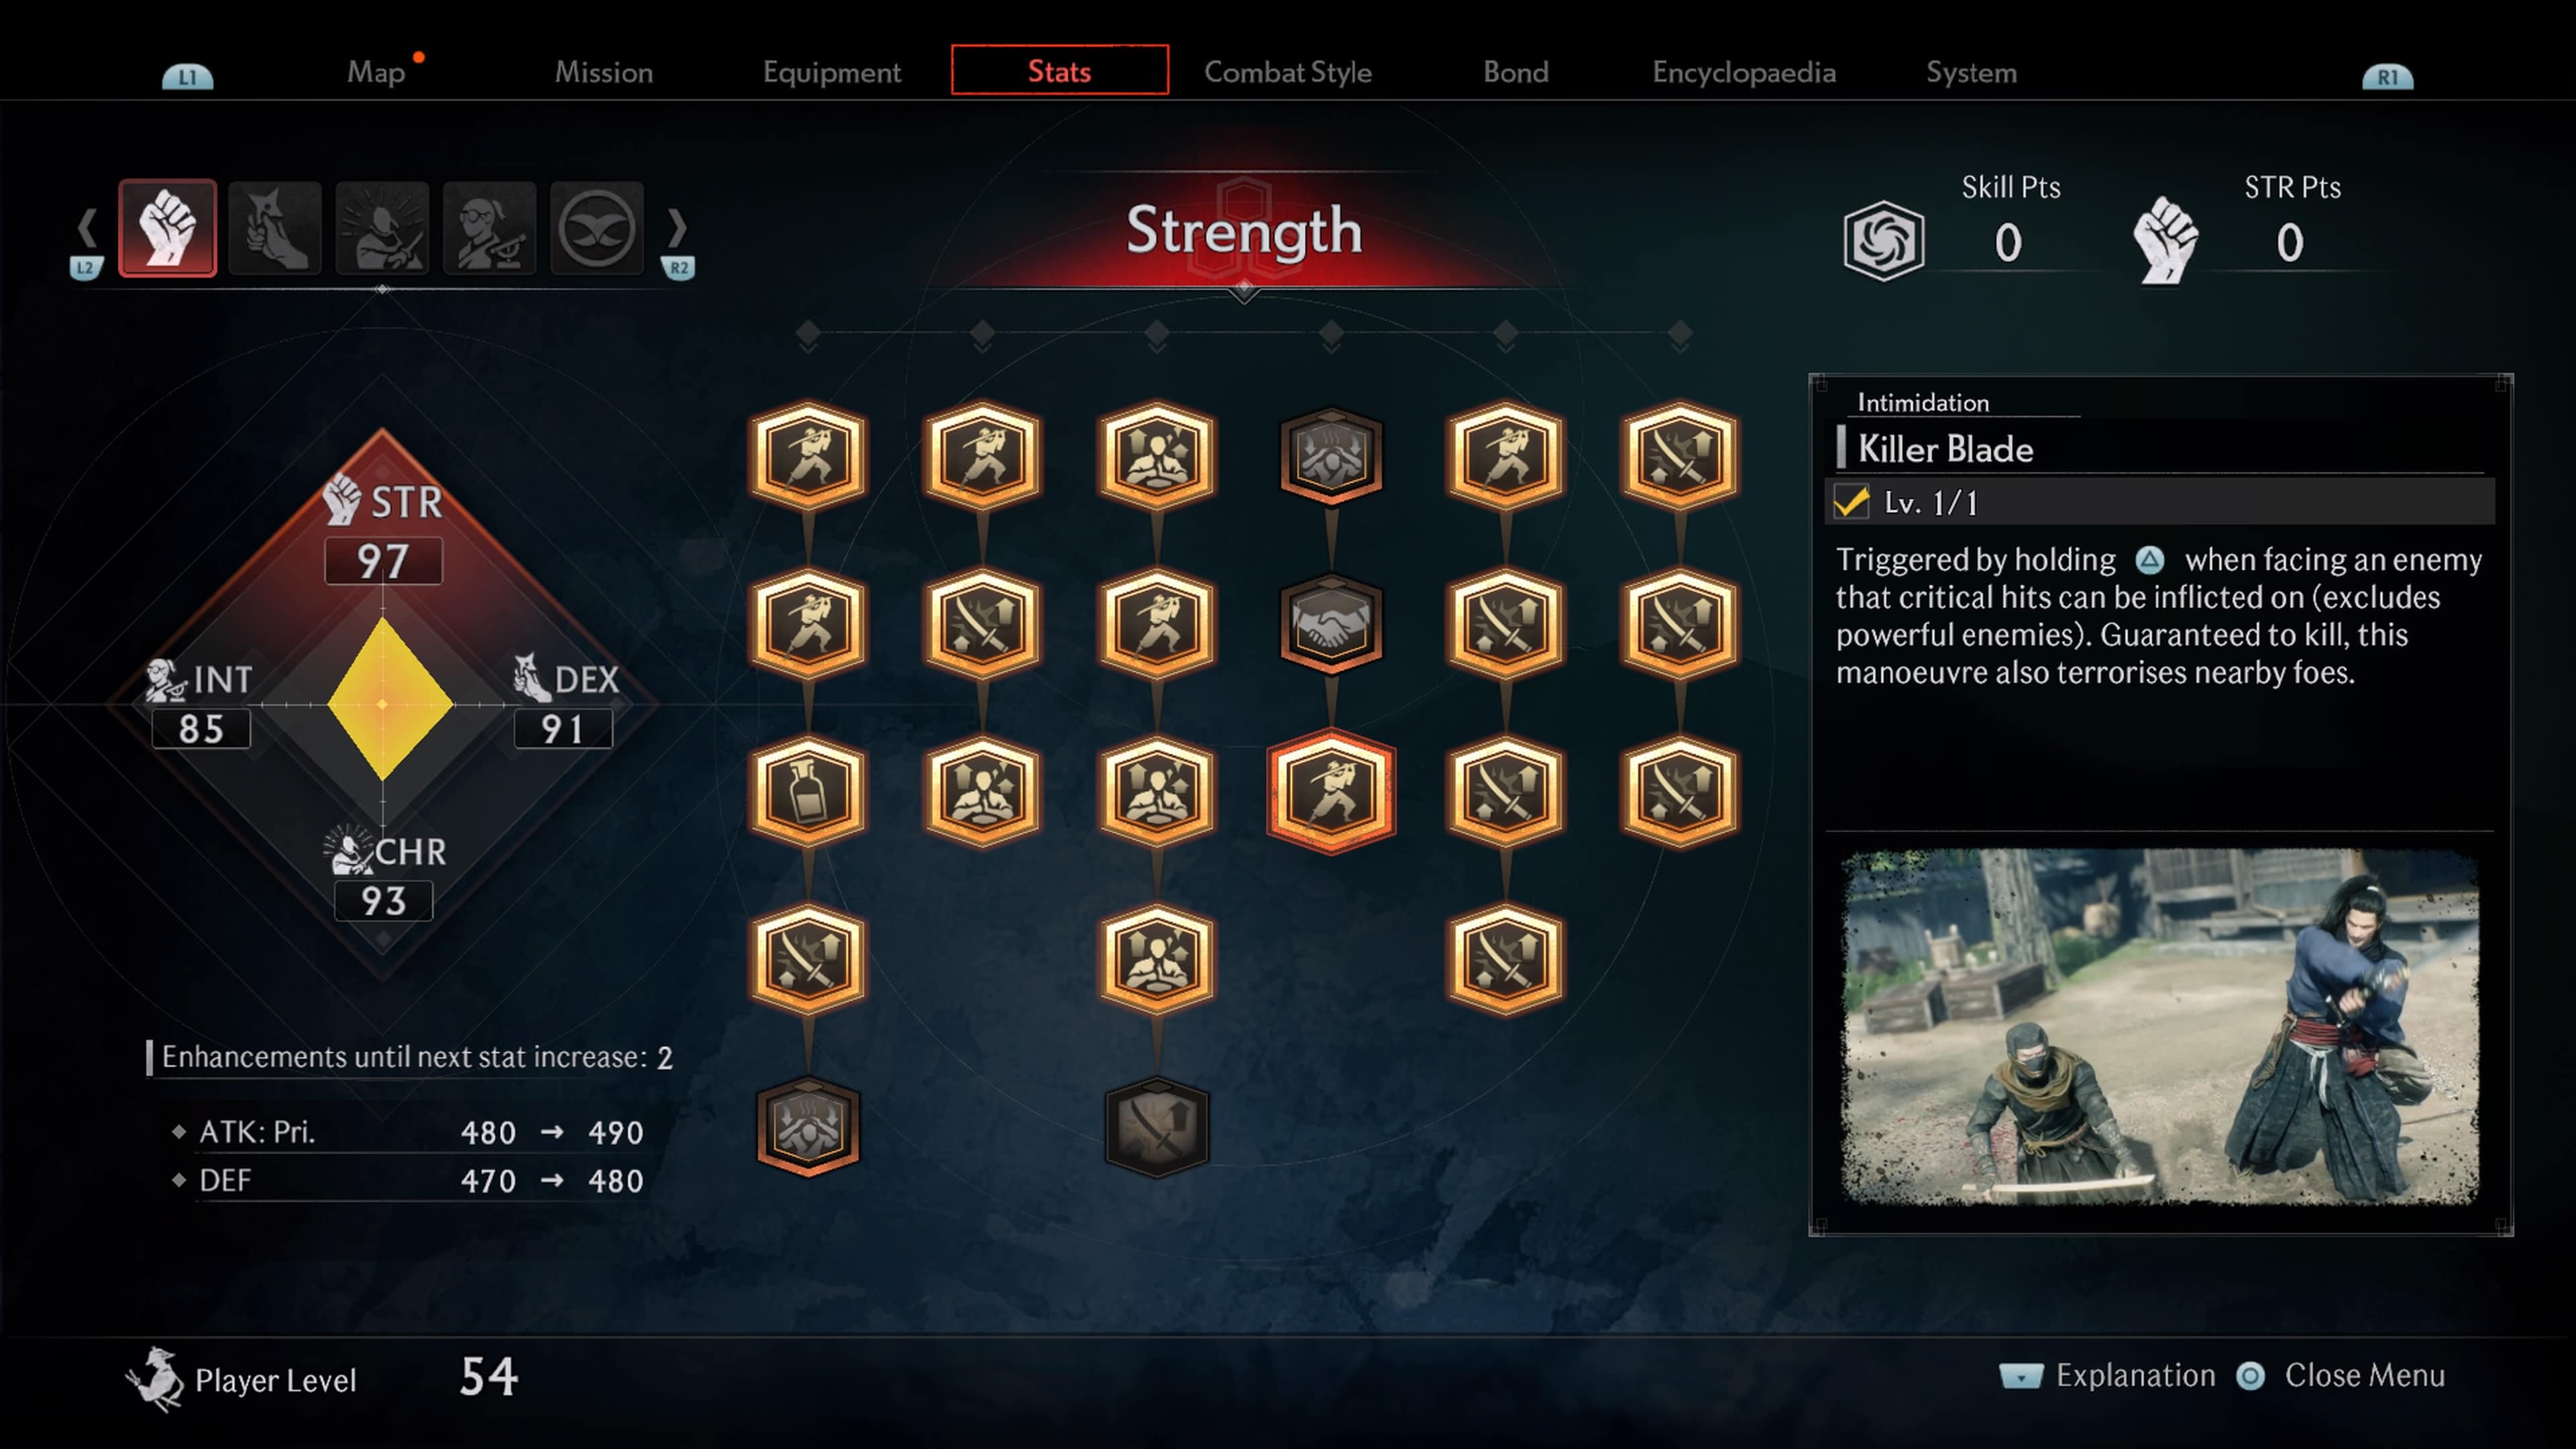 Rise of the Ronin skills - the skill tree showing the Killer Blade skill